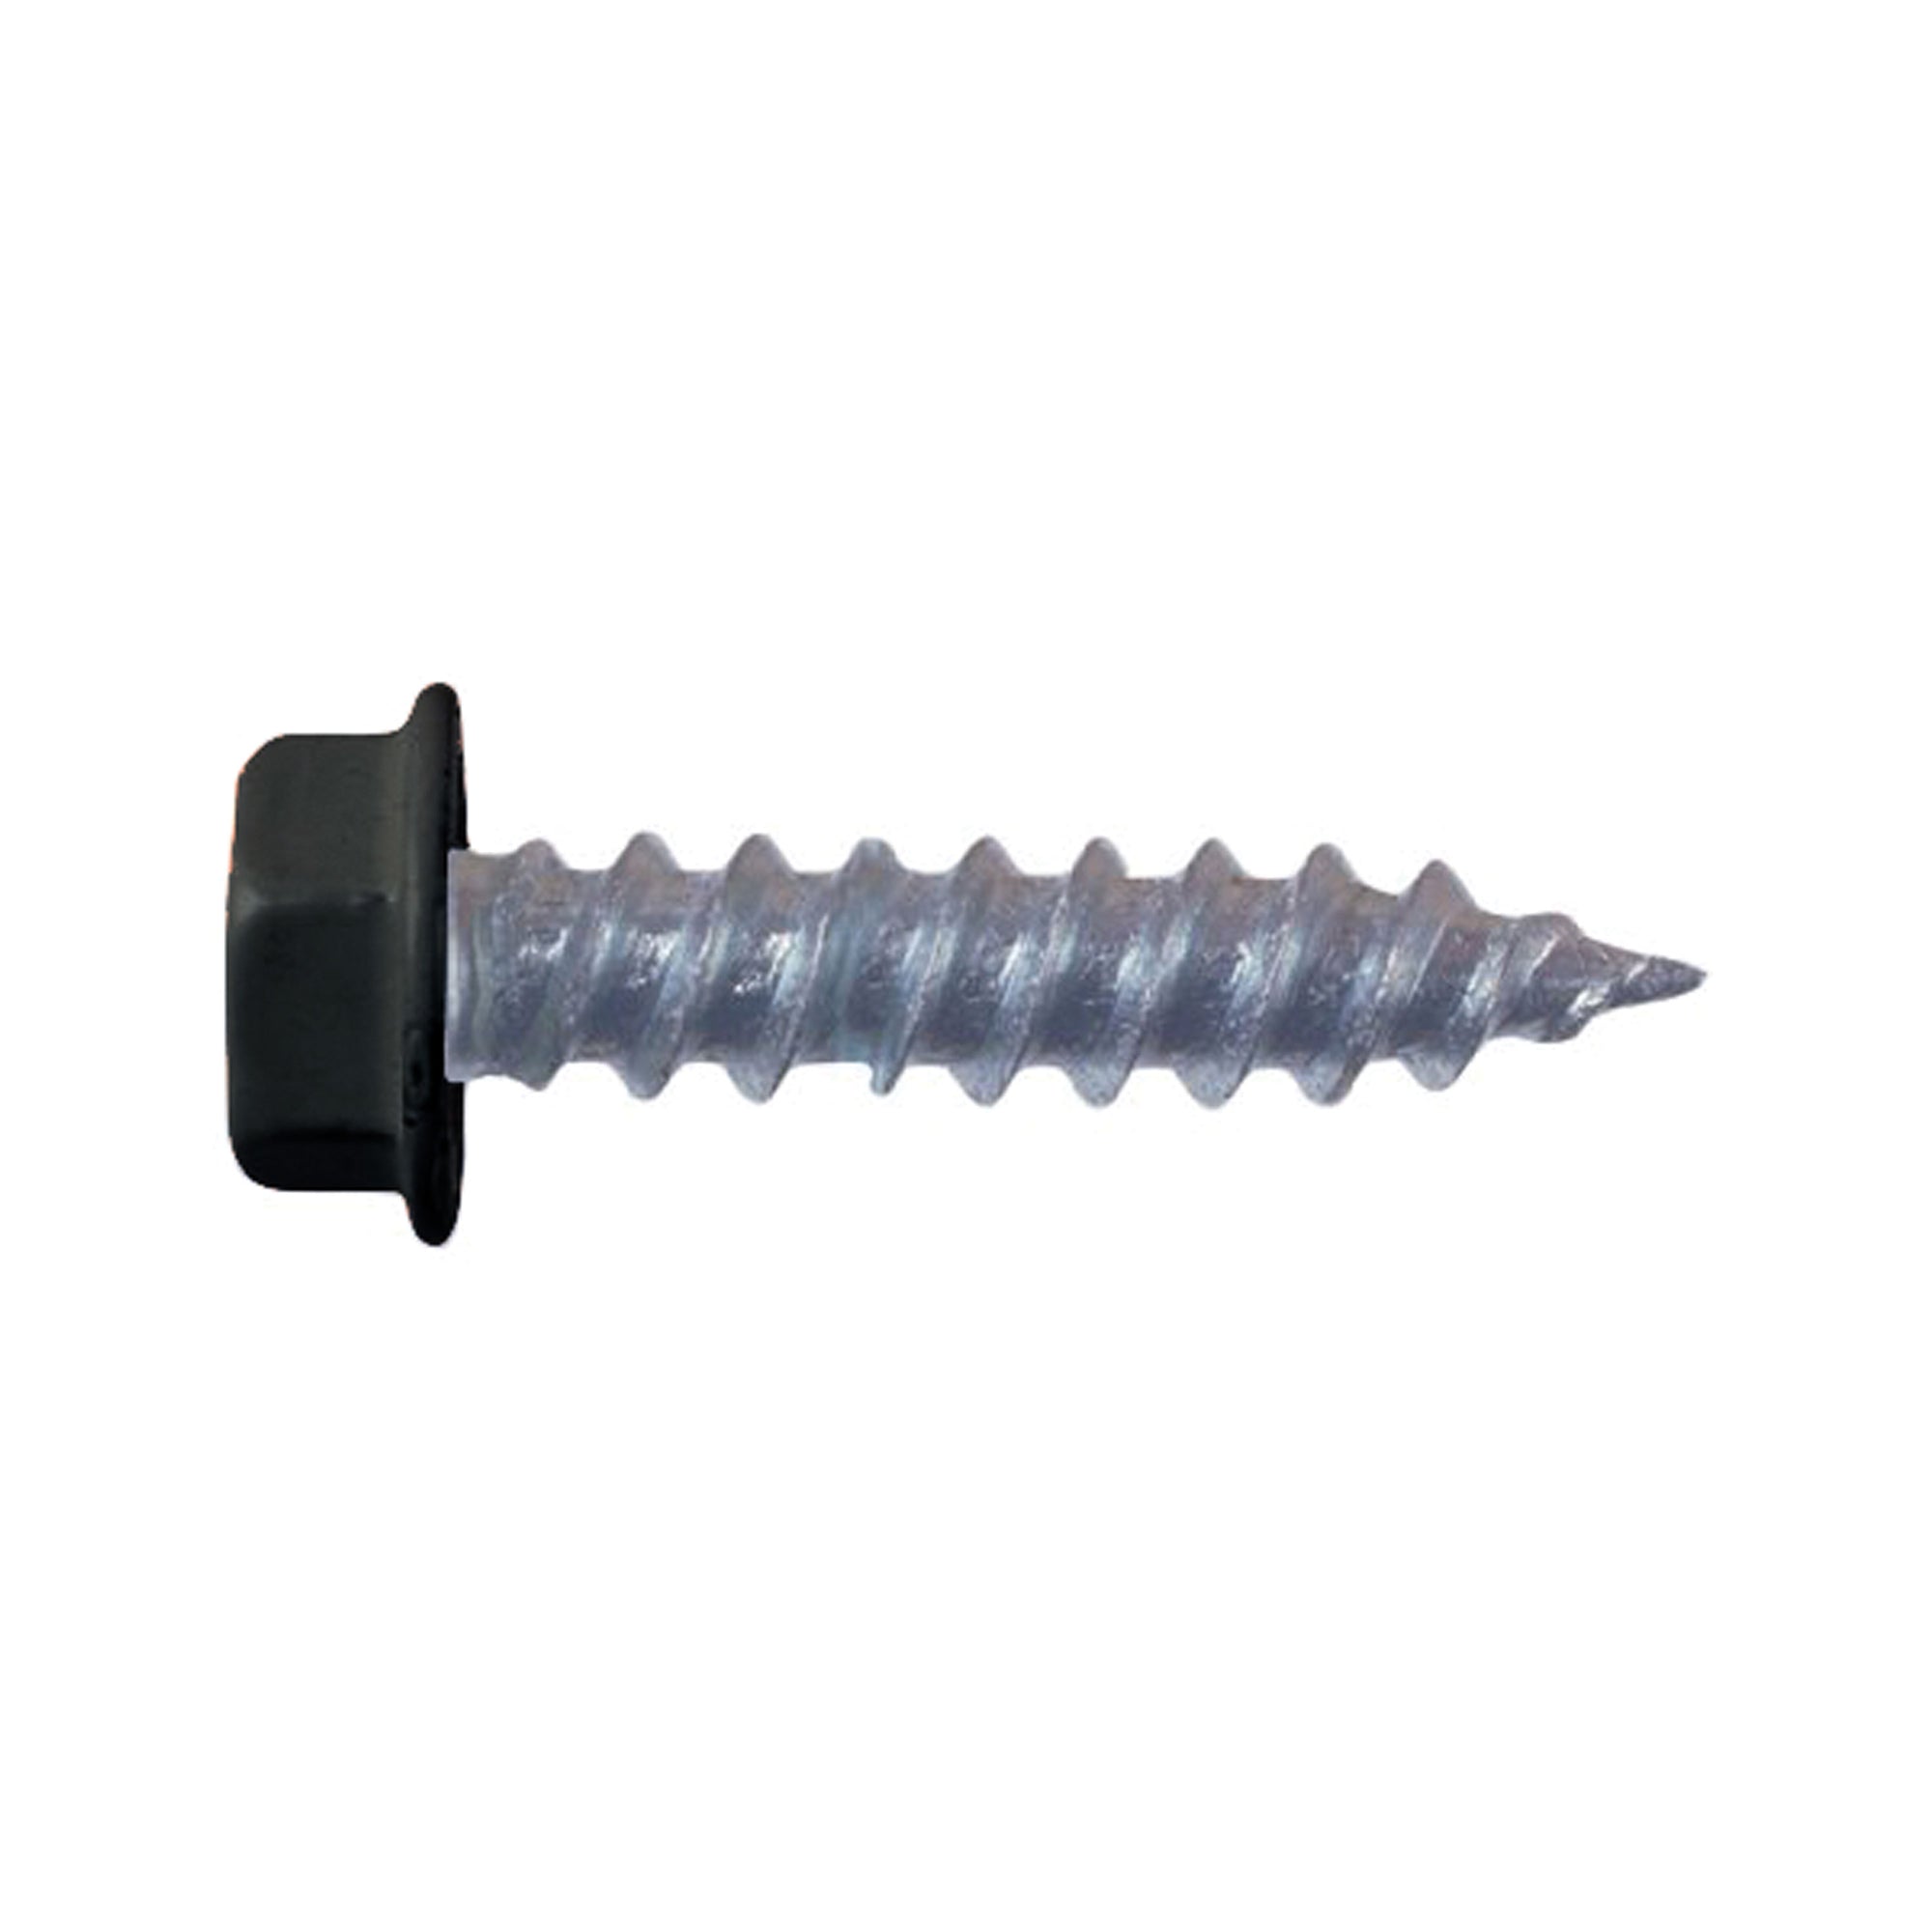 AP Products 012-TR50 BL 8 x 1-1/4 Black #8 Hex Washer Head Screw, 1-1/4" / Pack of 50